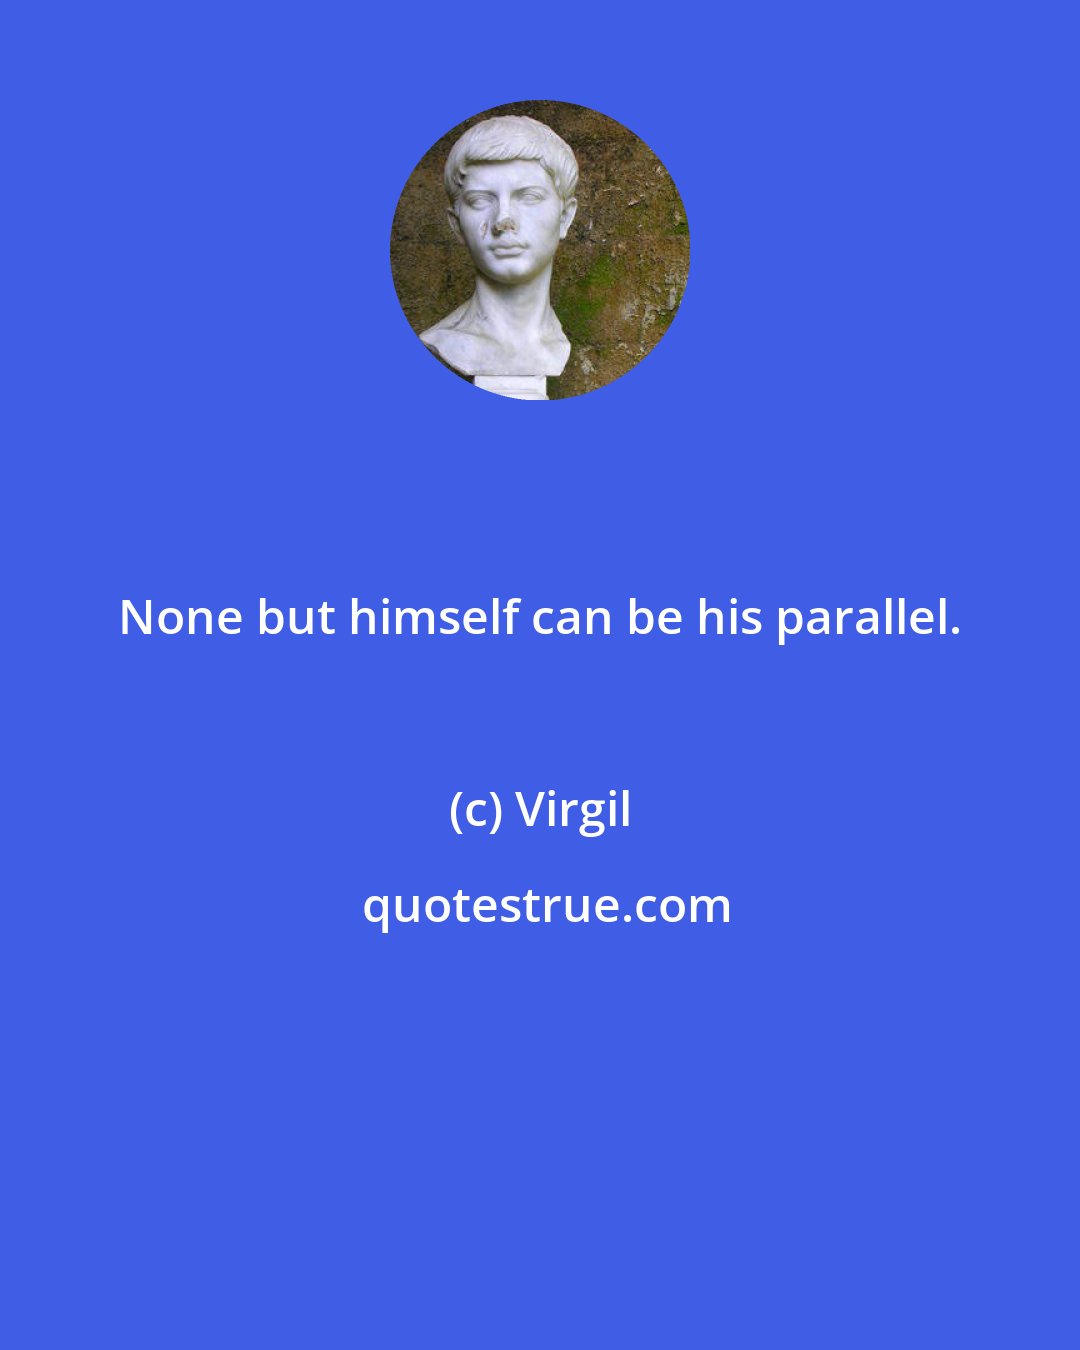 Virgil: None but himself can be his parallel.